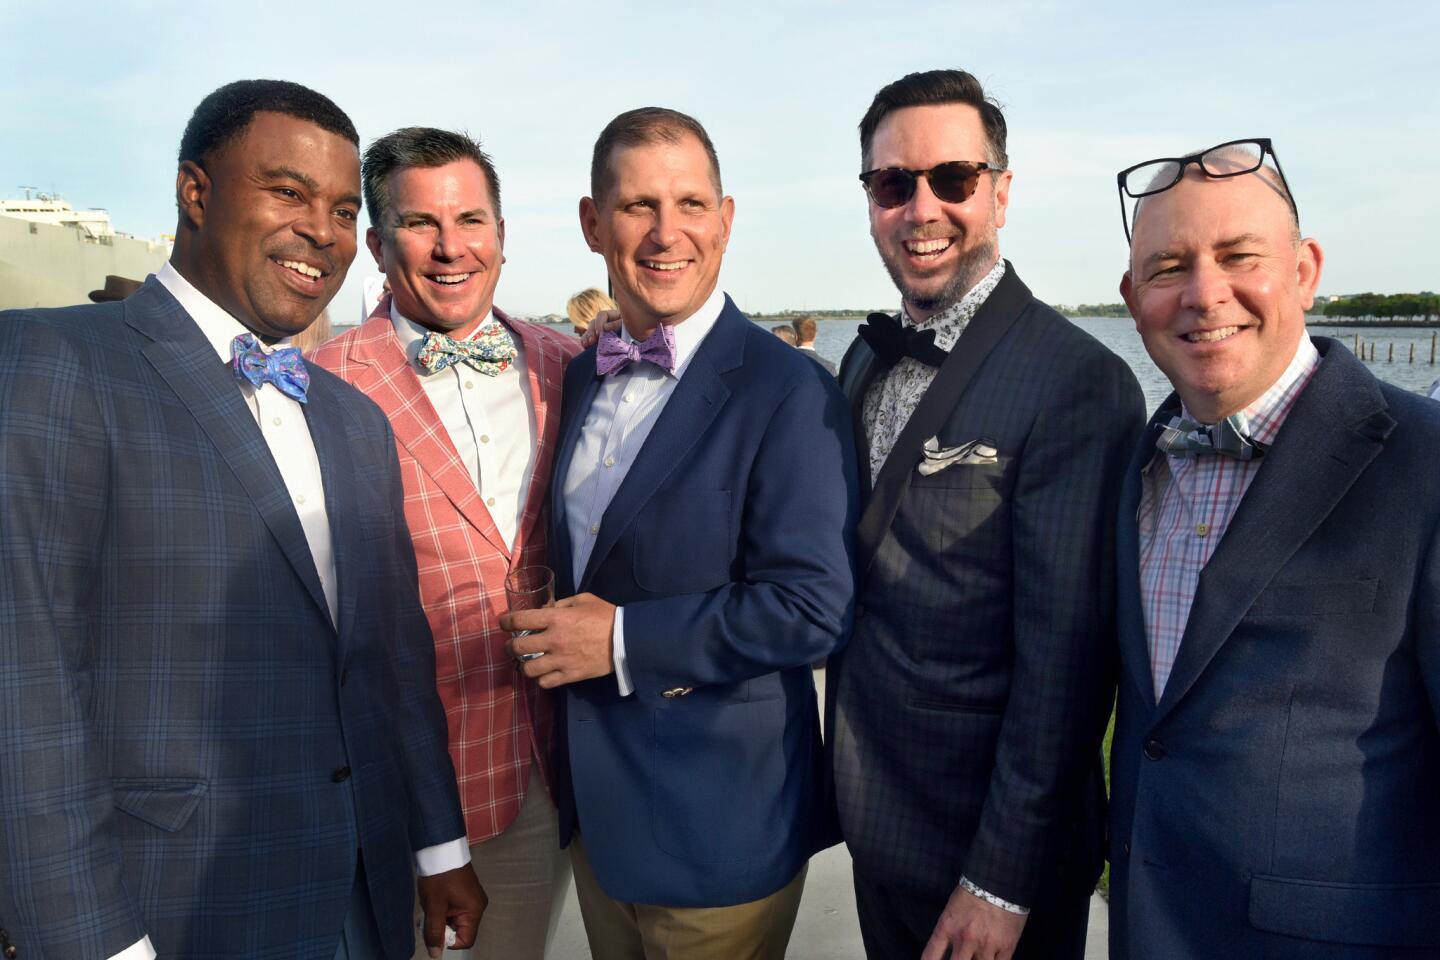 From left, Charles English, Chris Fiacco, Eric Borsoni, Craig Martin and Jim Kinney, at the Bourbon and Bowties charity fundraiser held at Rye Street Tavern in Port Covington.